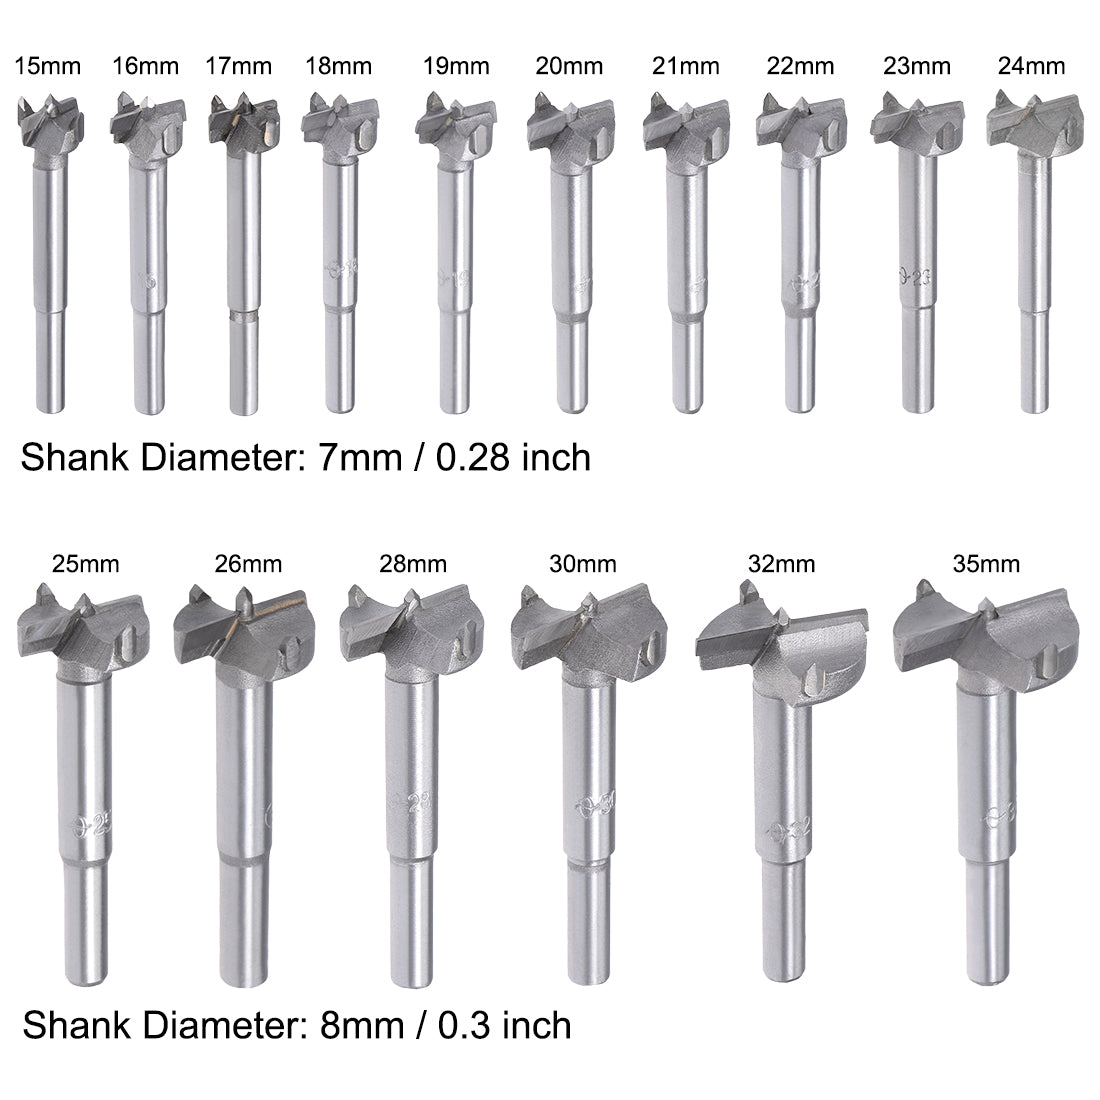 uxcell Uxcell Forstner Wood Boring Drill Bits 15mm to 35mm Dia. Hole Saw Carbide Tip Round Shank Cutting for Hinge Plywood MDF CNC Tool 16in1 Set